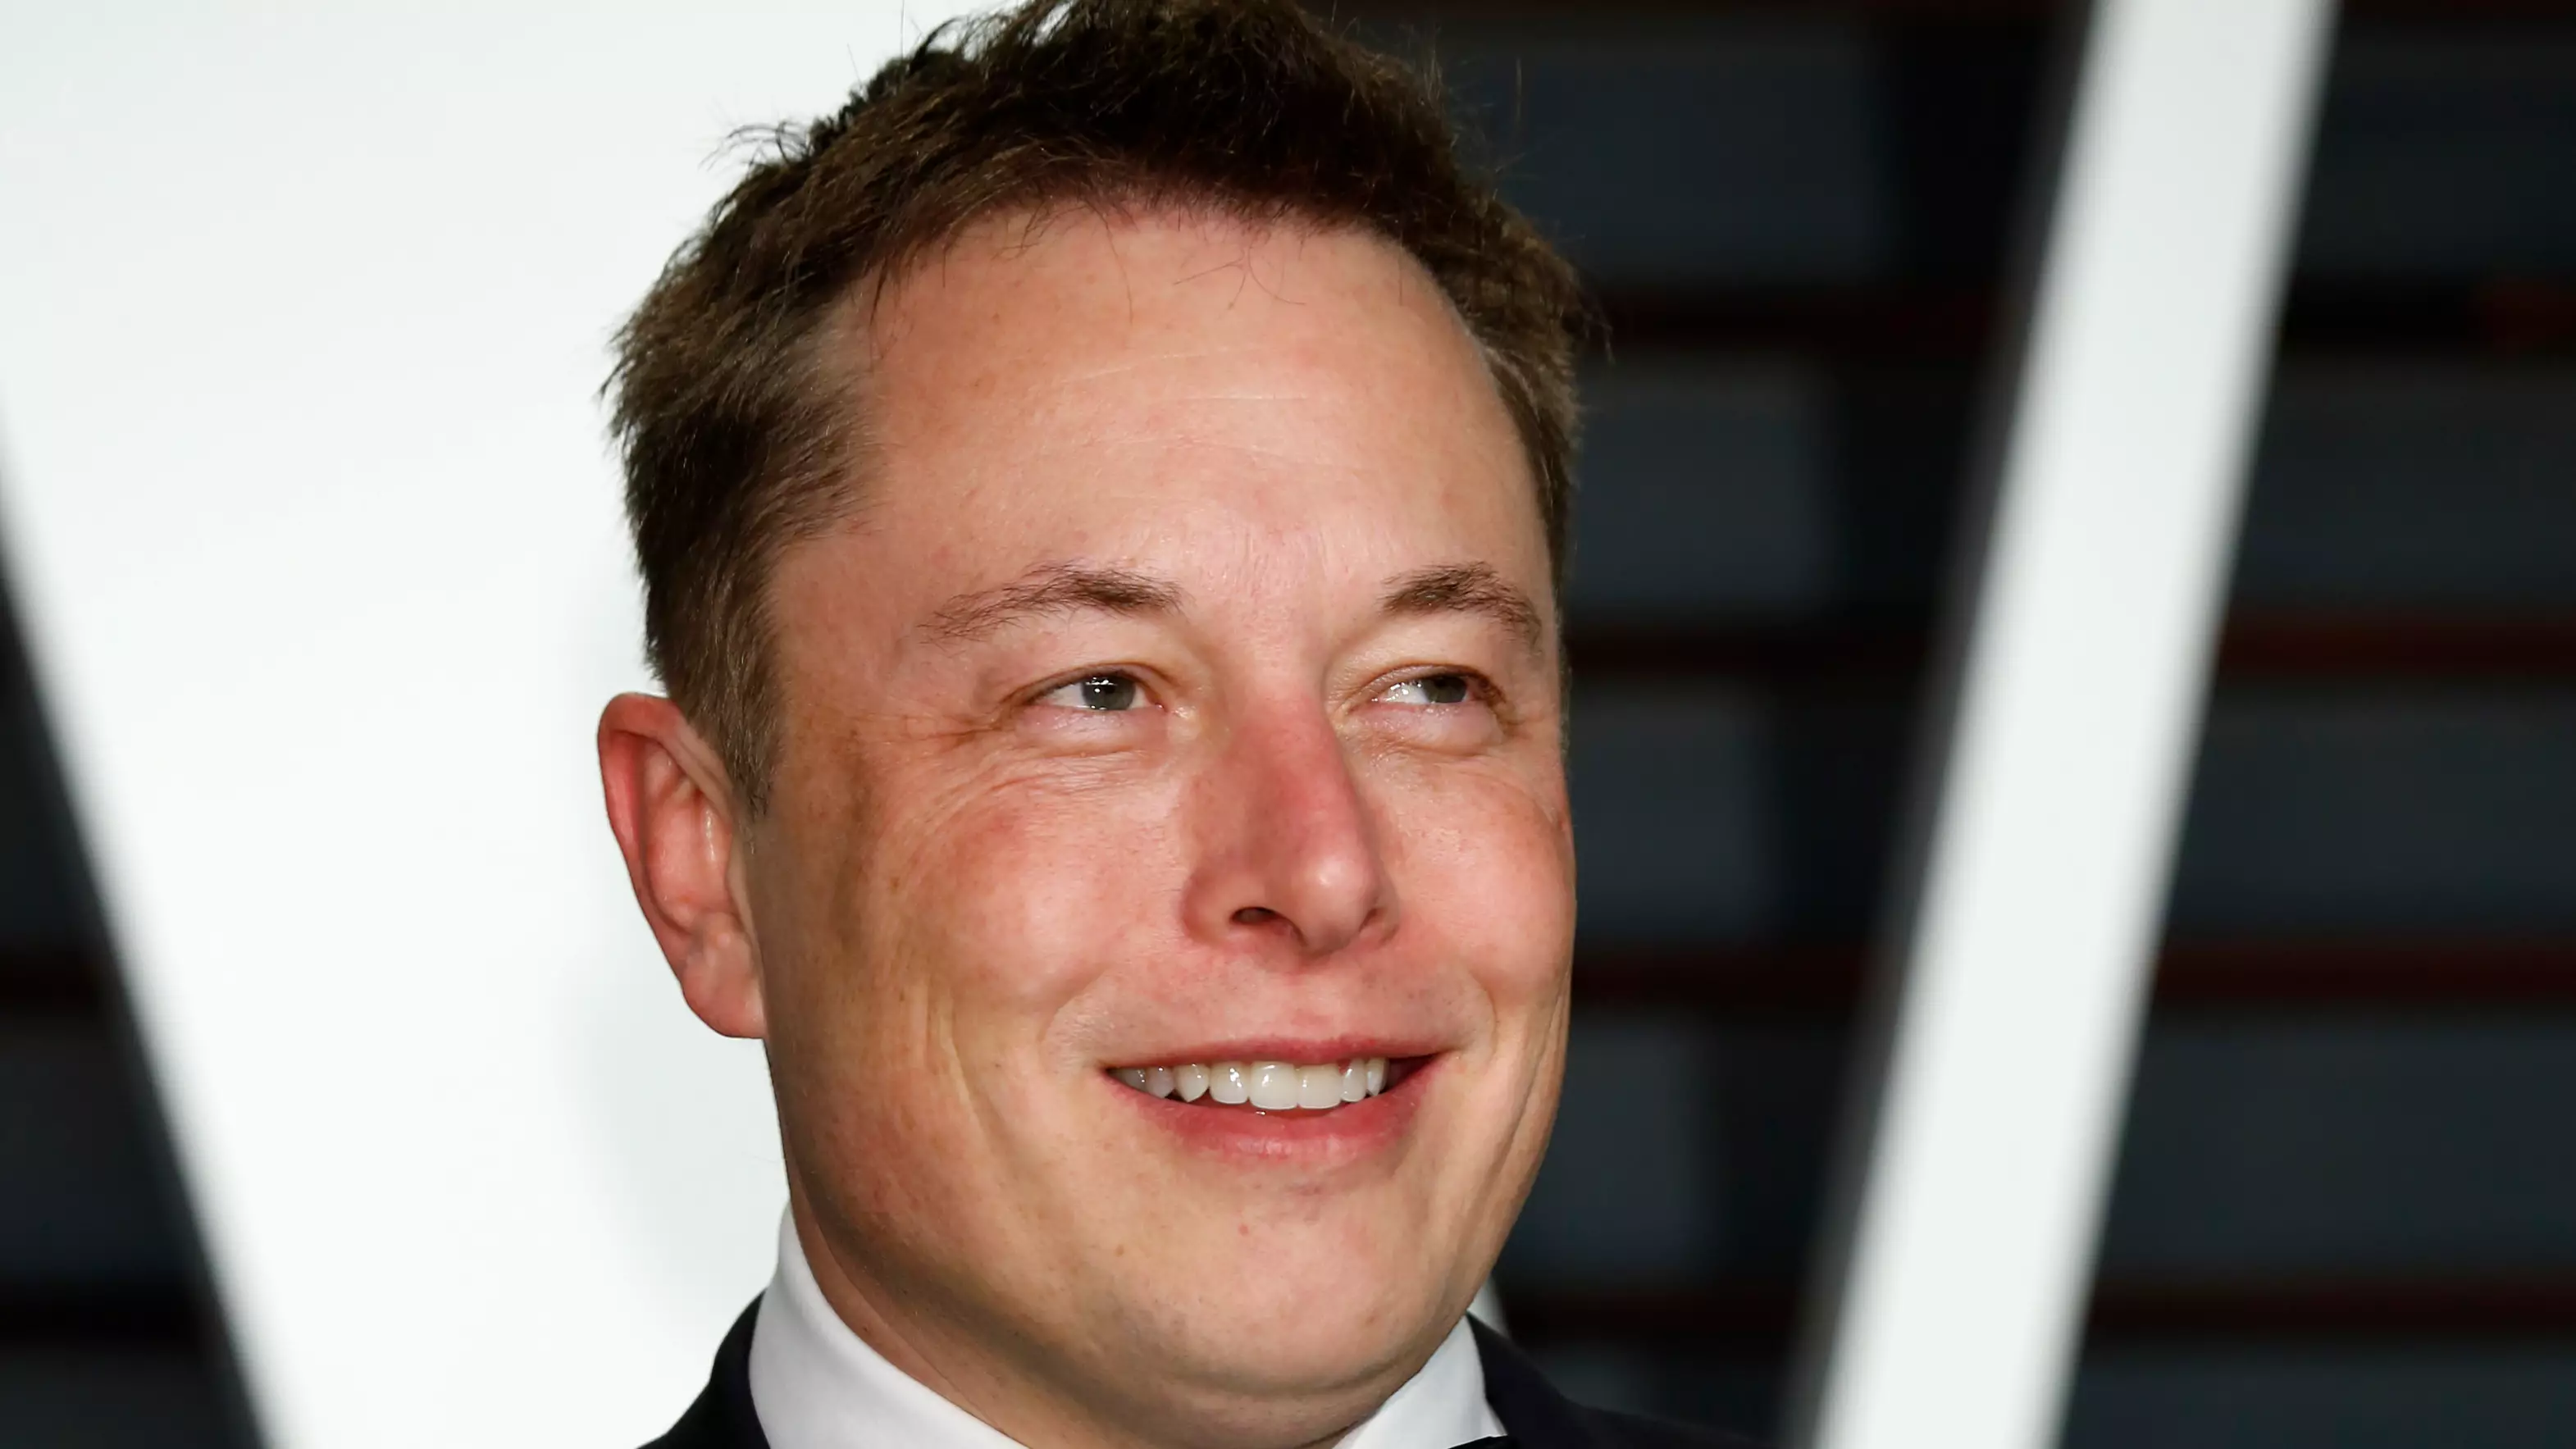 Here's How Elon Musk Manages His Time So Effectively